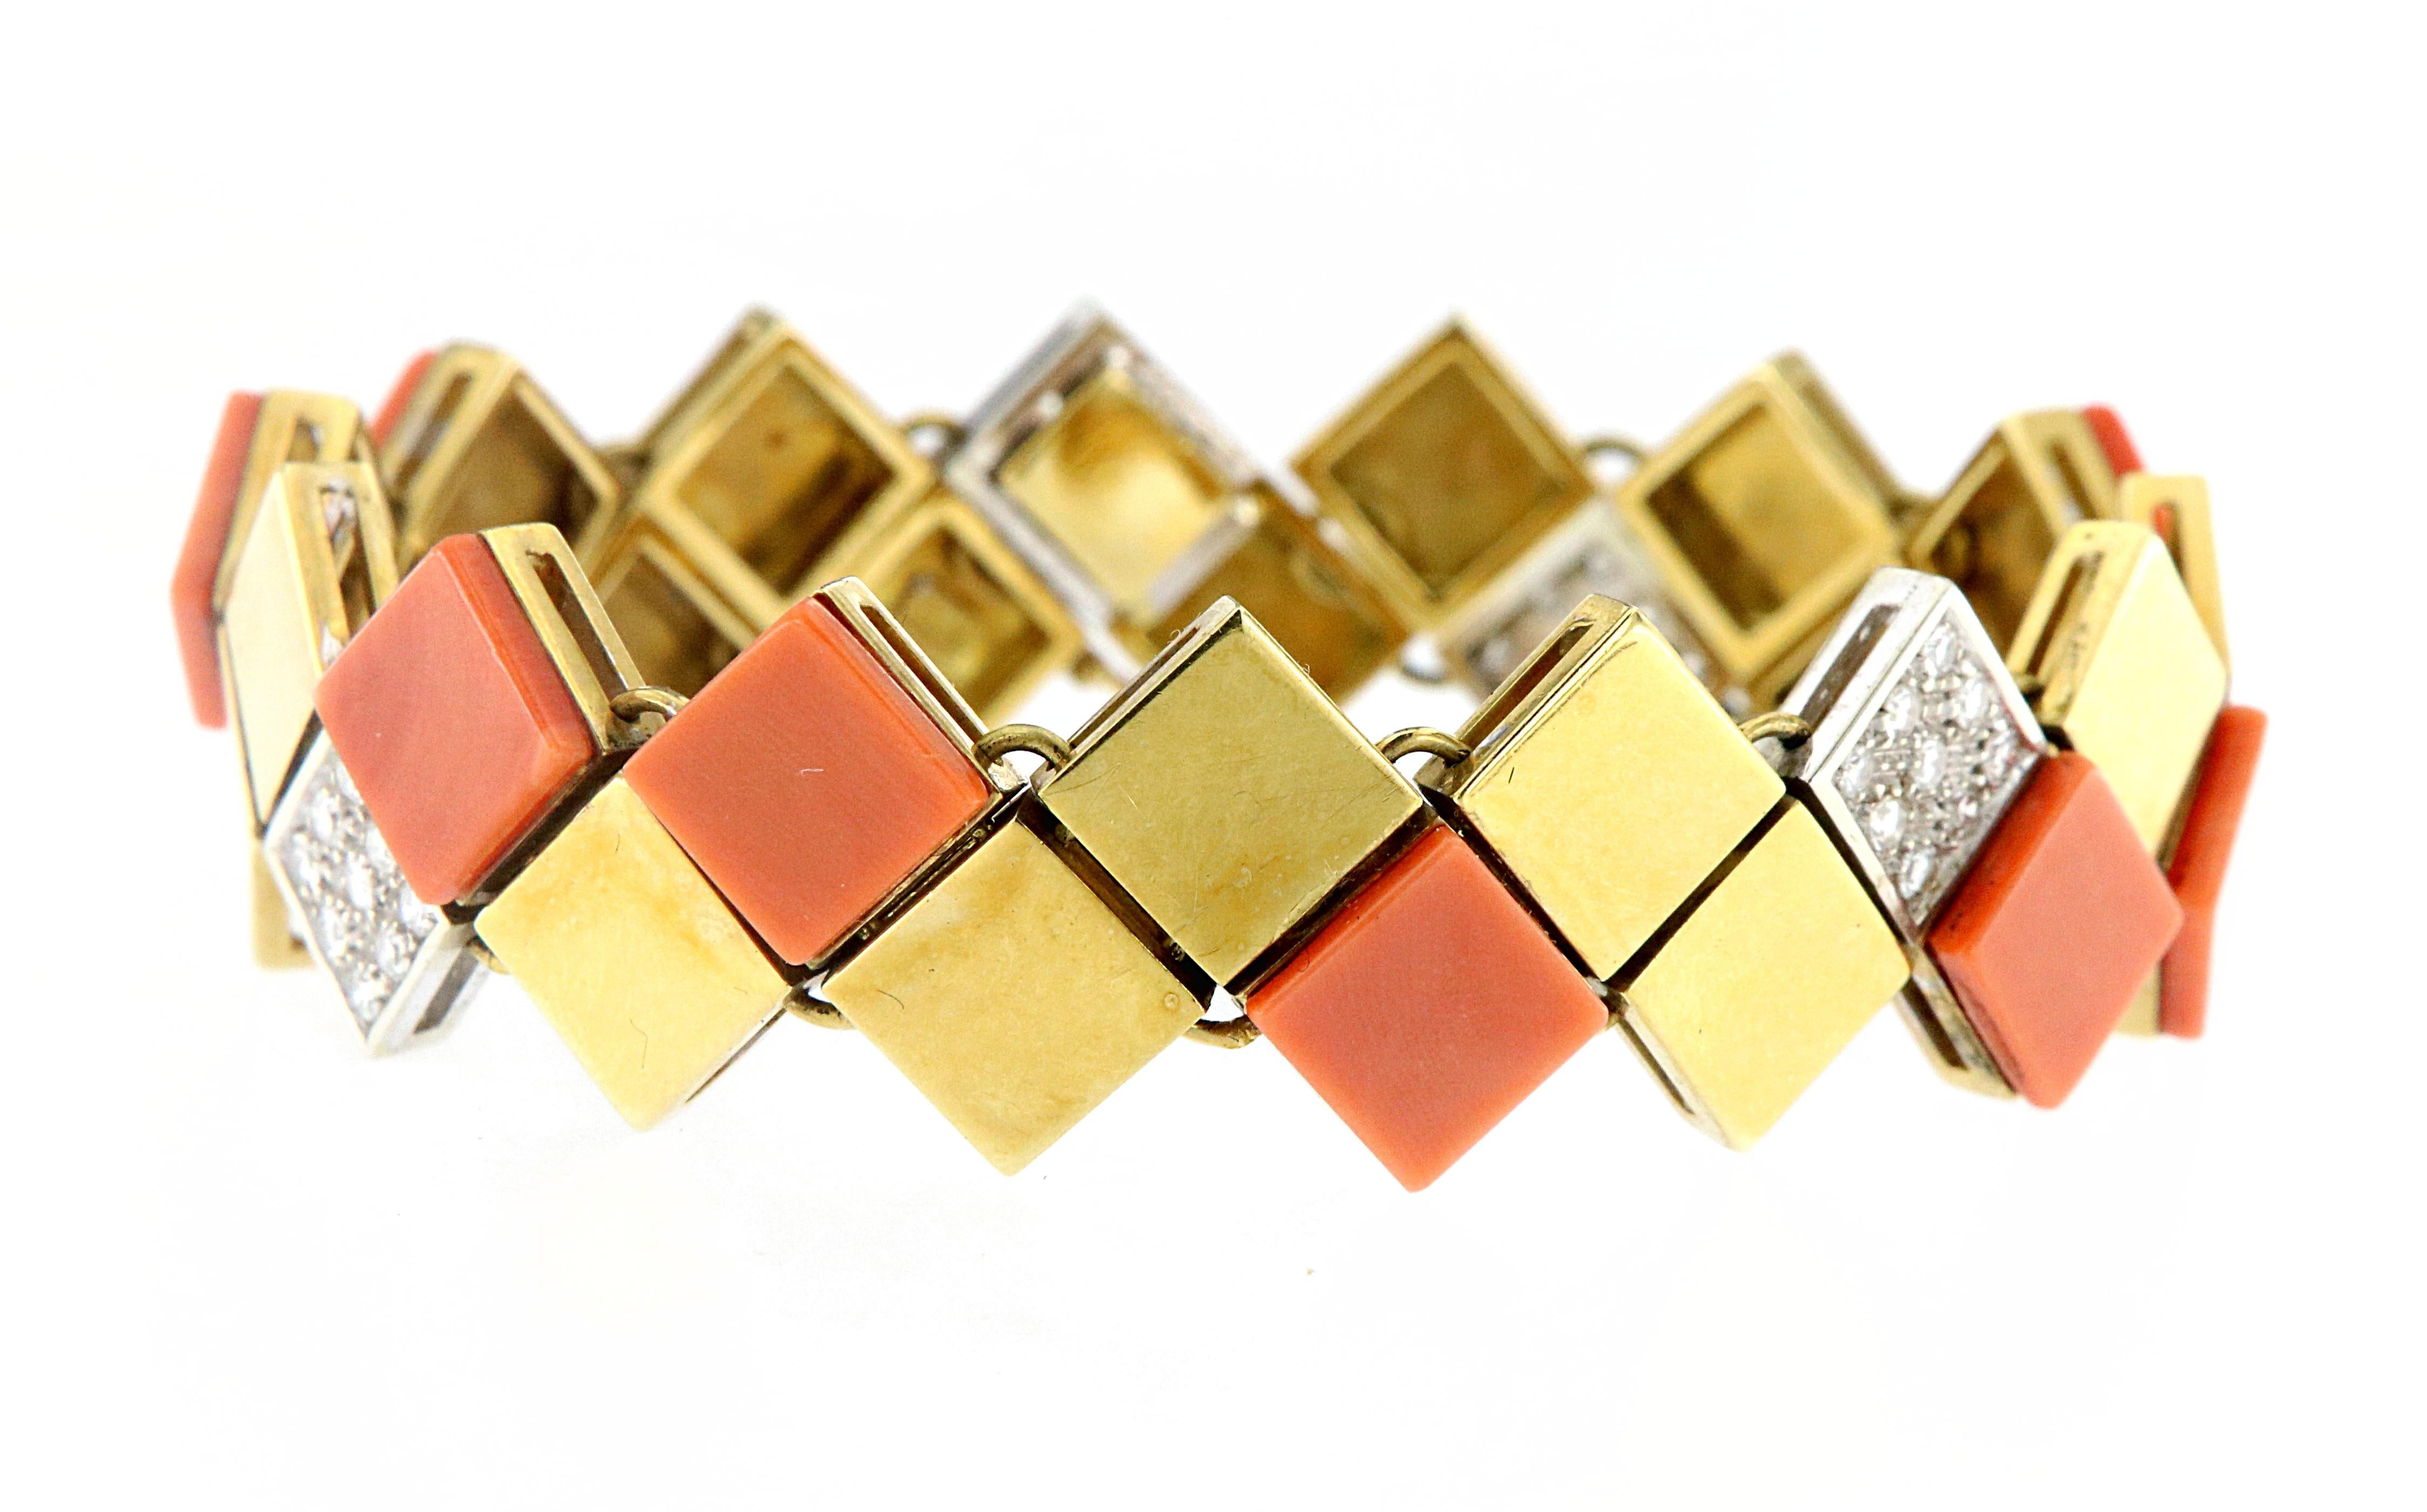 Offered here is an authentic Van Cleef & Arpels 18k yellow gold vintage coral and diamond square links bracelet. Signed and numbered by Van Cleef & Arpels. Weighing 42.90grams.
four of the square links are white gold bead set with a total of 35